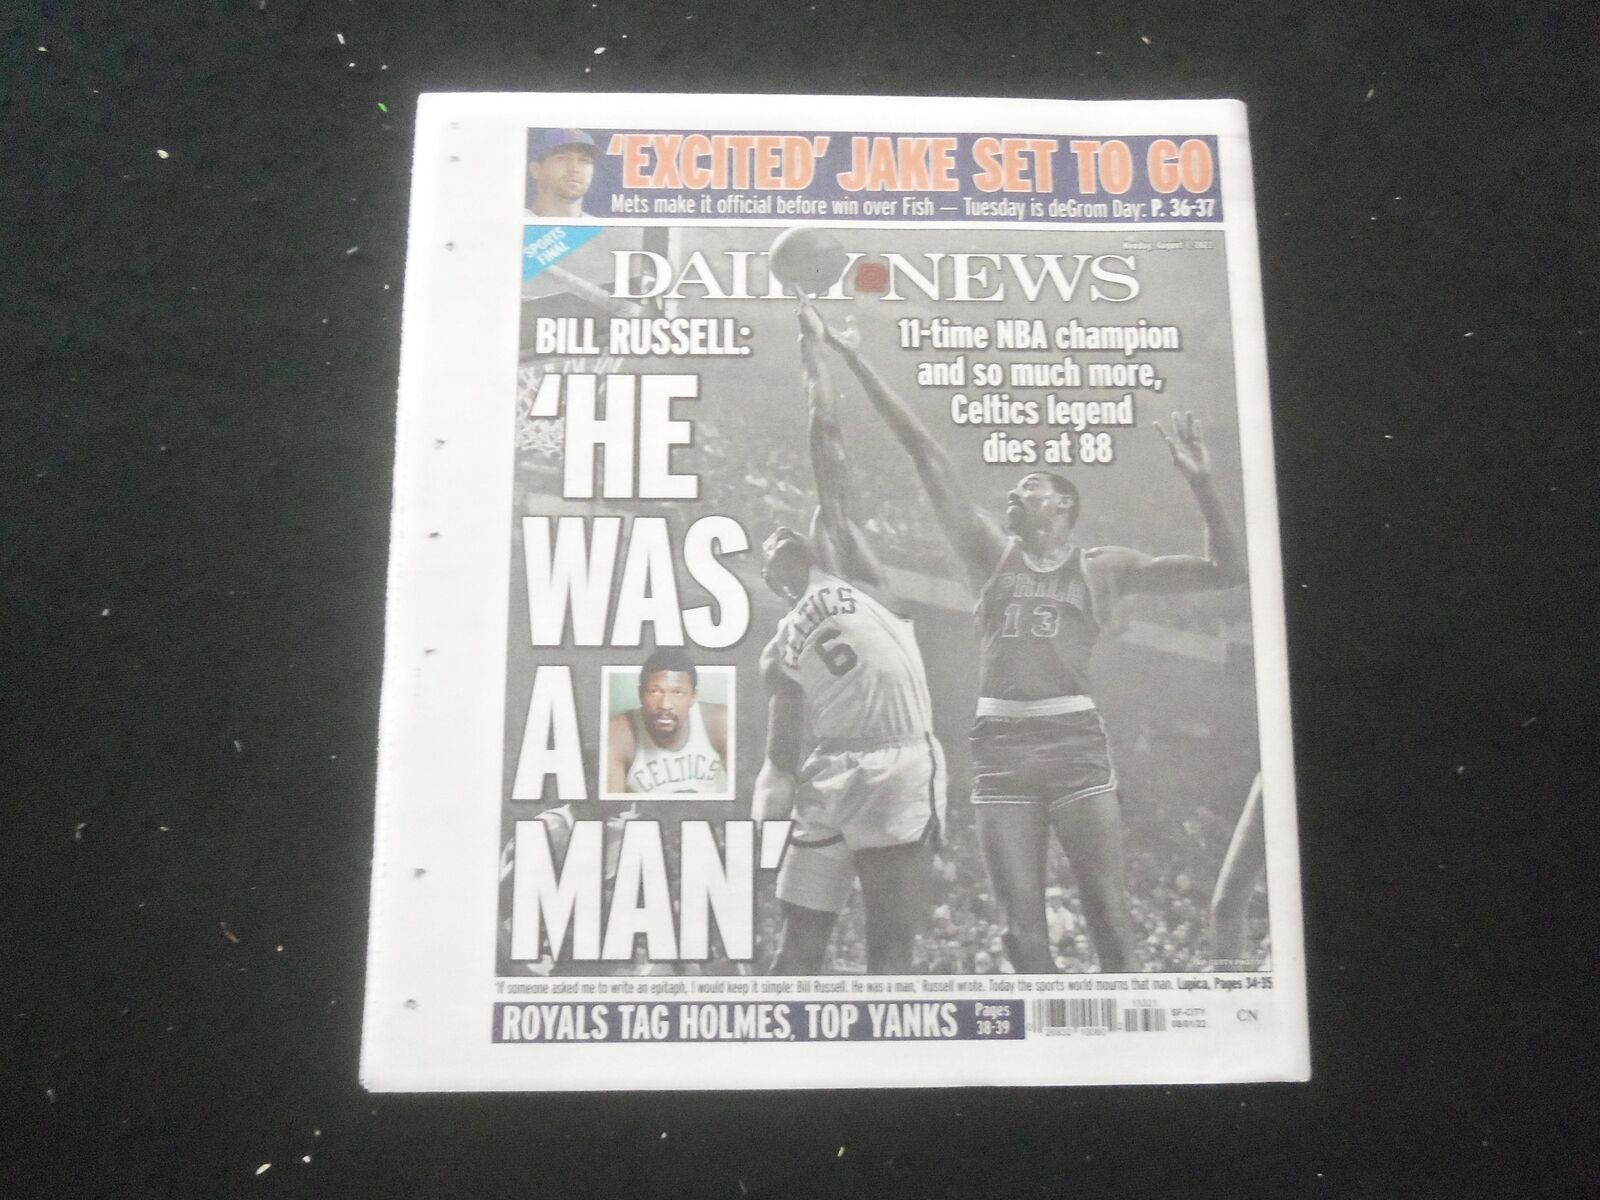 2022 AUGUST 1 NEW YORK DAILY NEWS NEWSPAPER - BILL RUSSELL DIED (1934-2022)